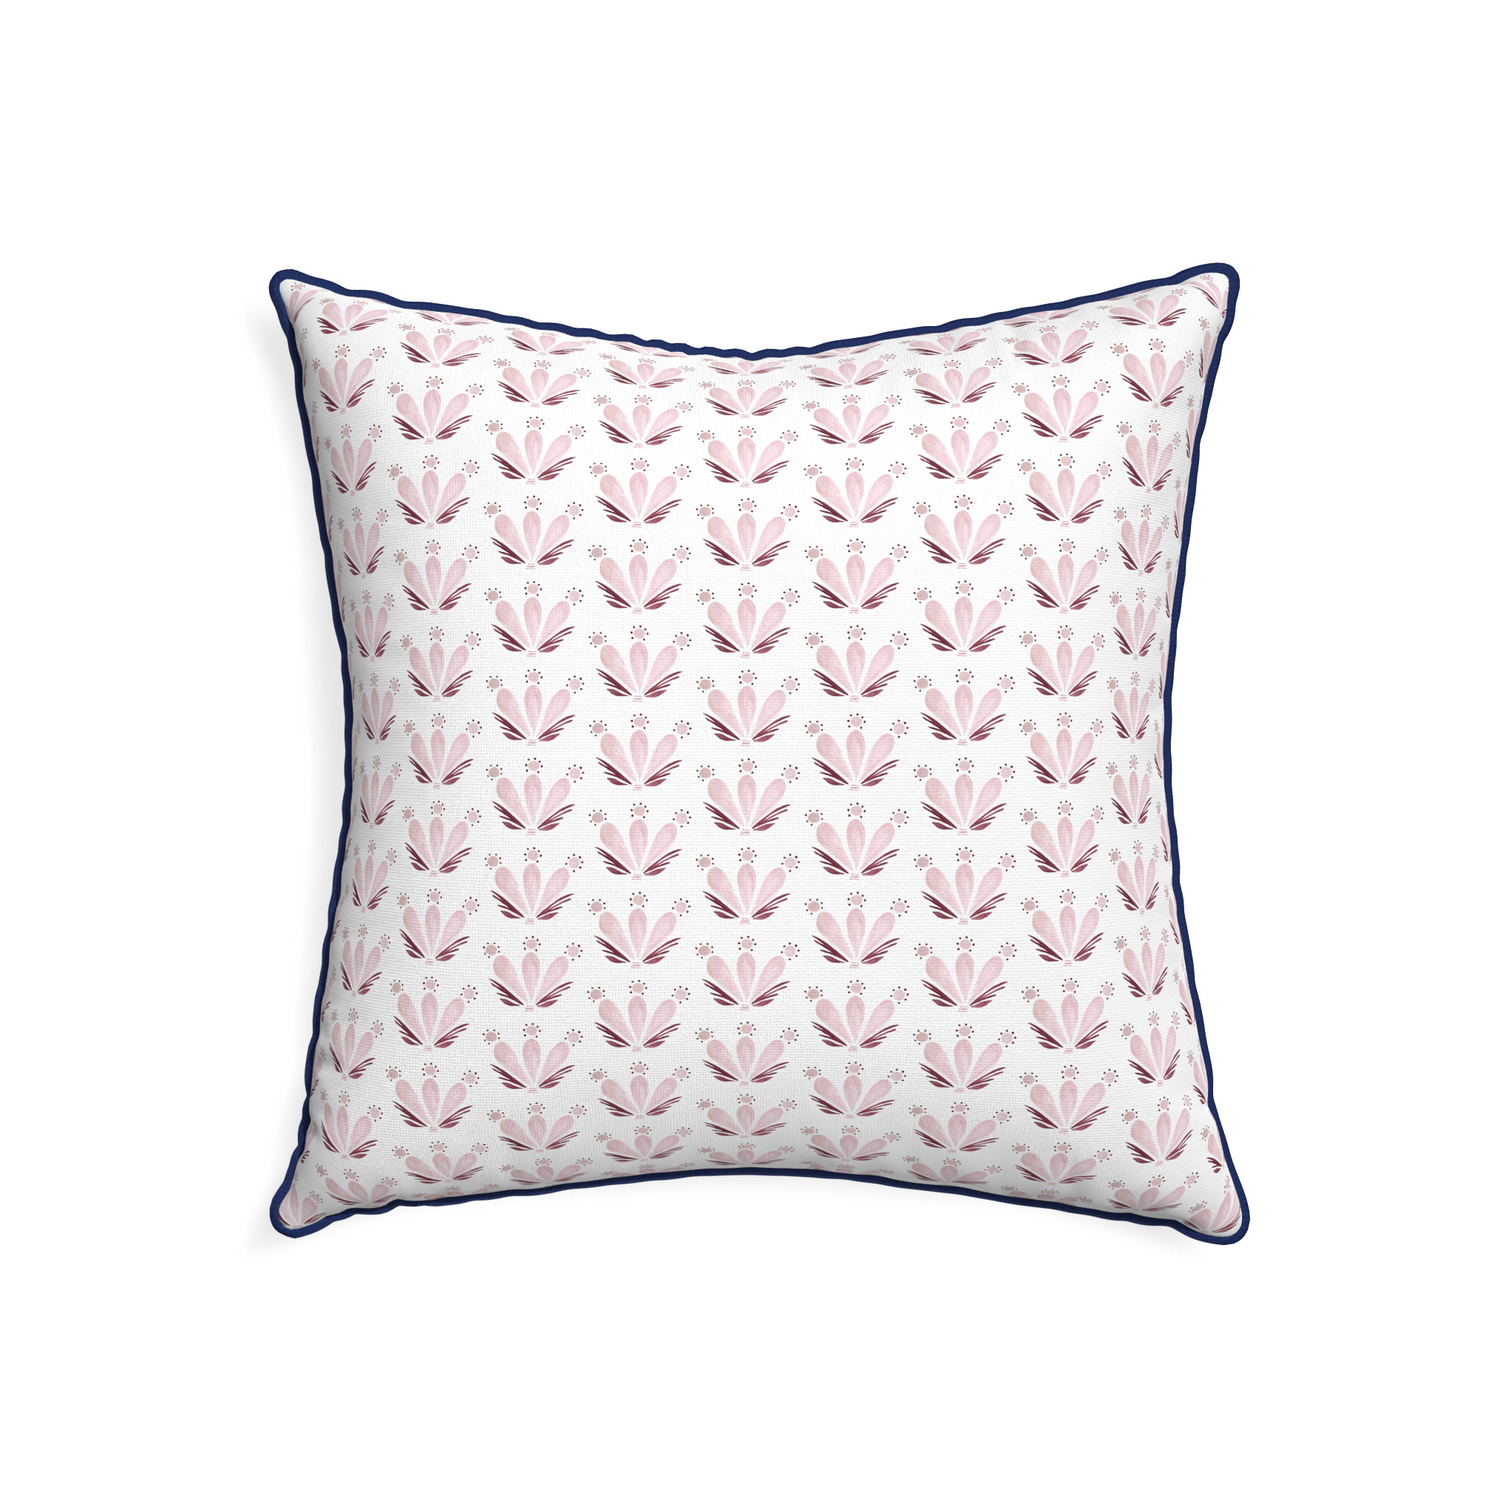 22-square serena pink custom pillow with midnight piping on white background